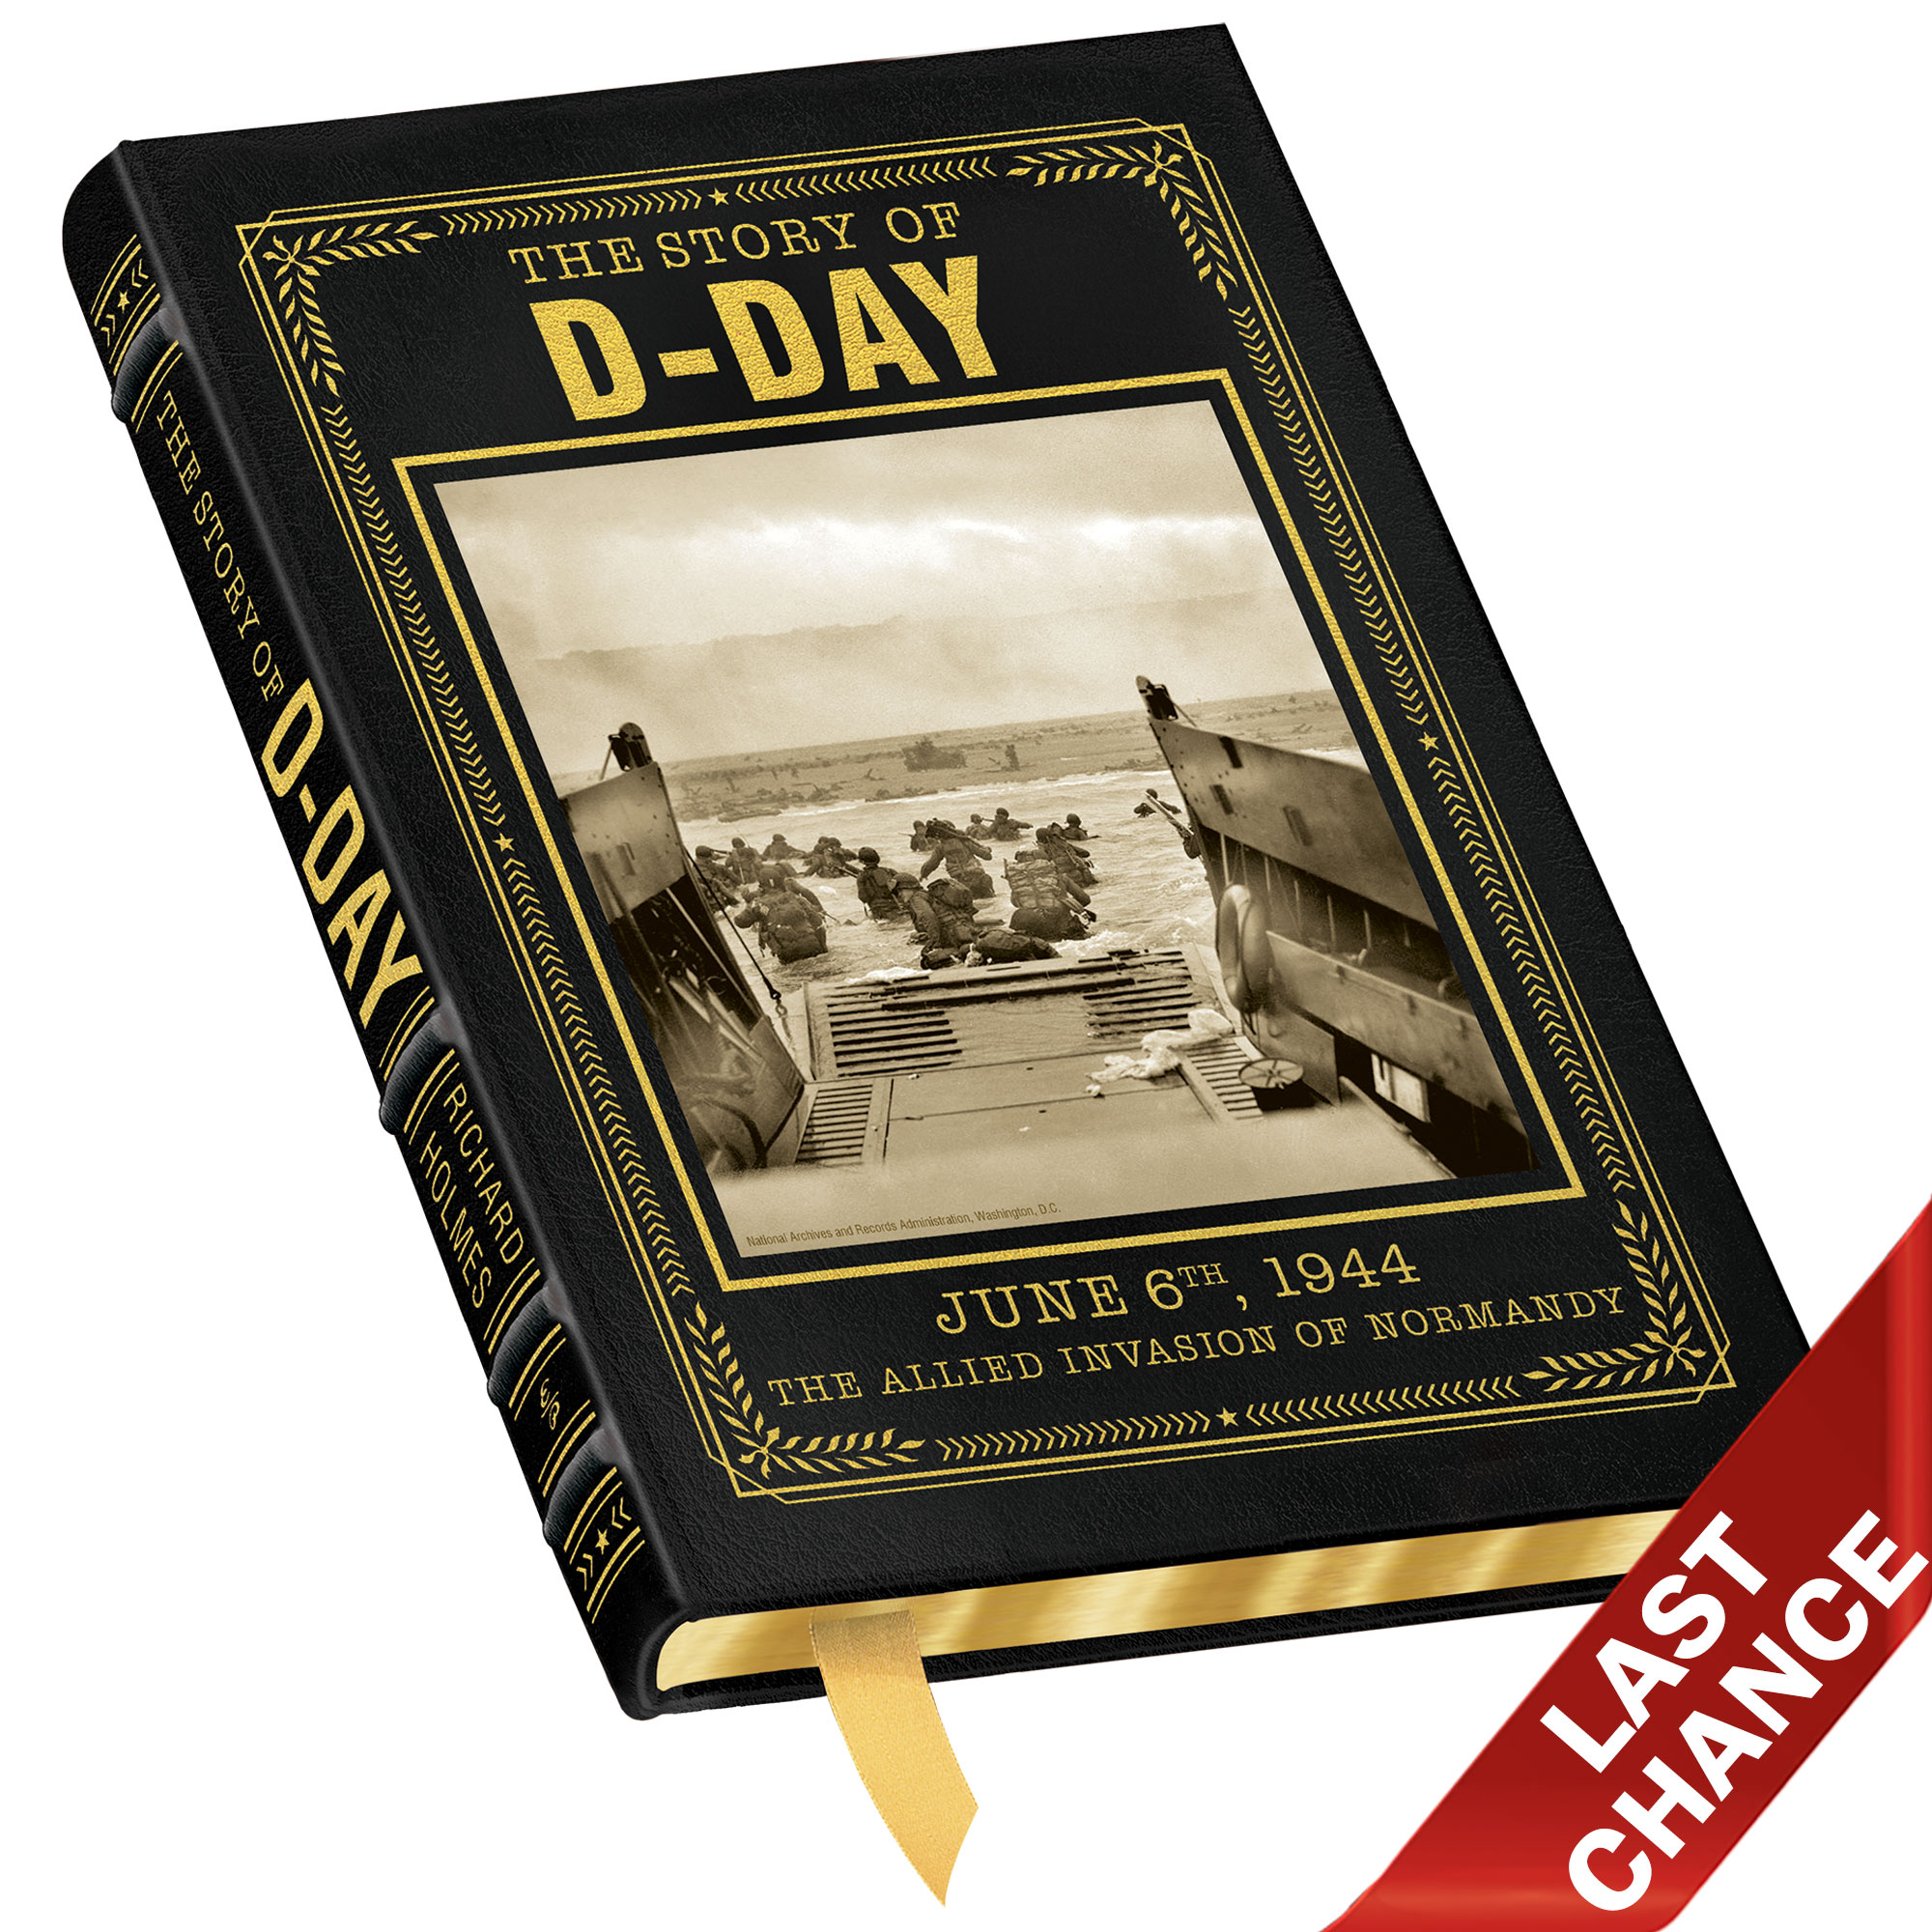 Records Relating to D-Day